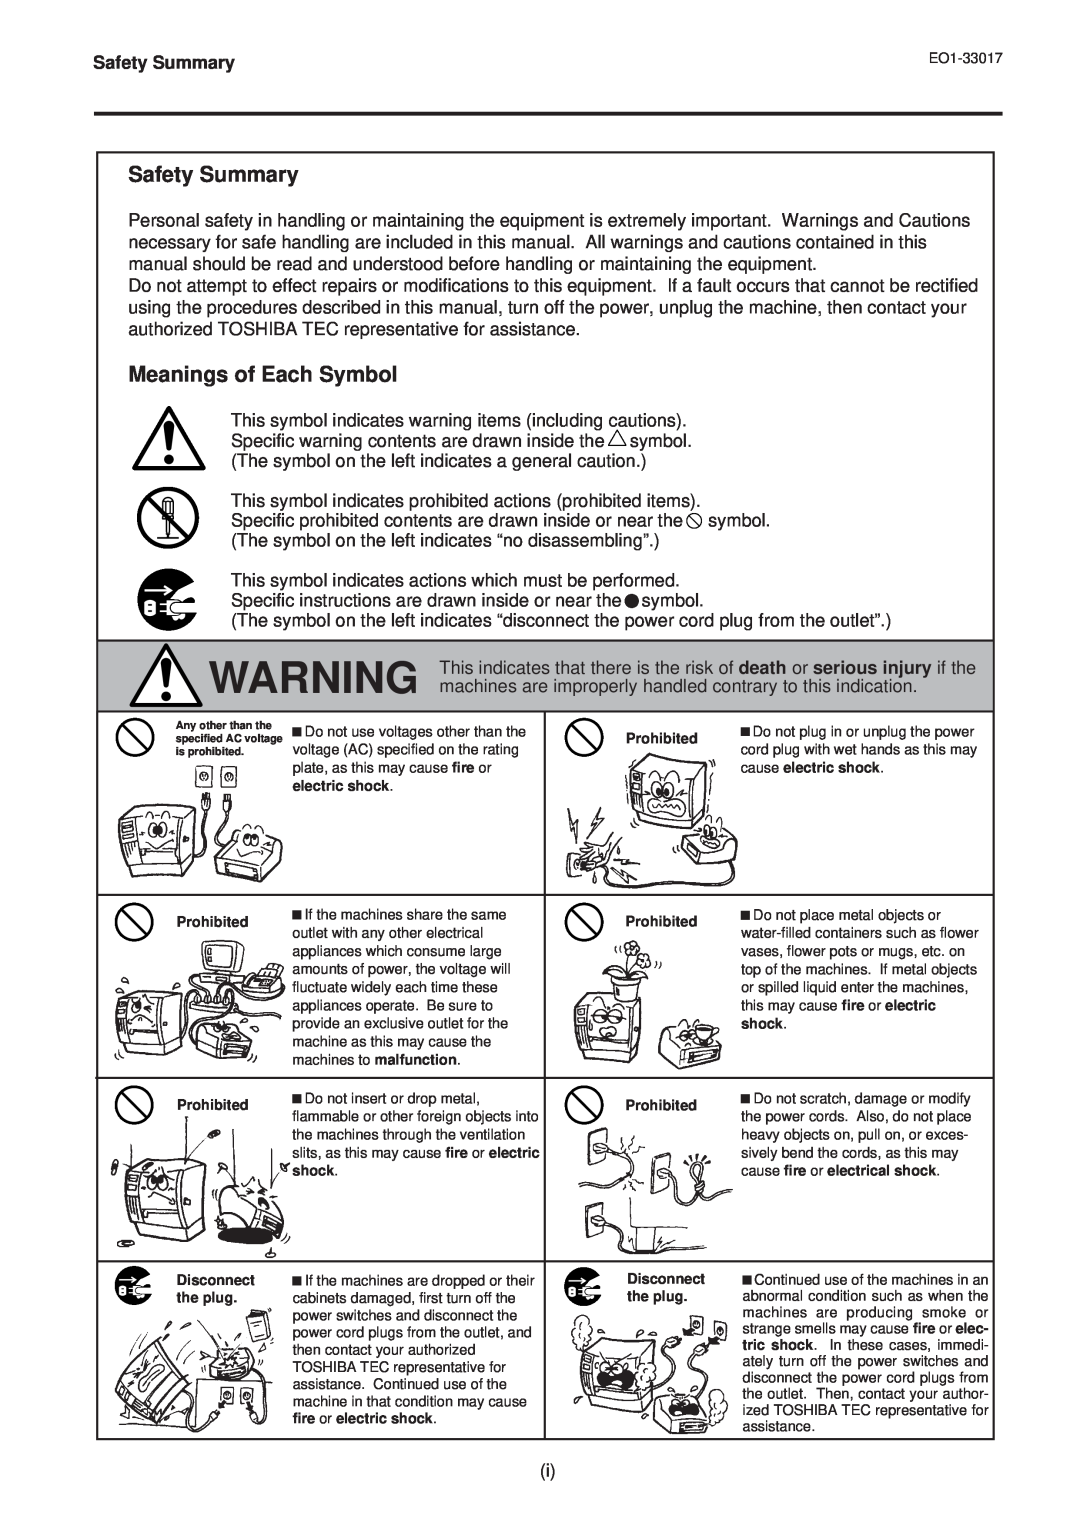 Toshiba B-880-QQ SERIES owner manual Safety Summary, Meanings of Each Symbol 